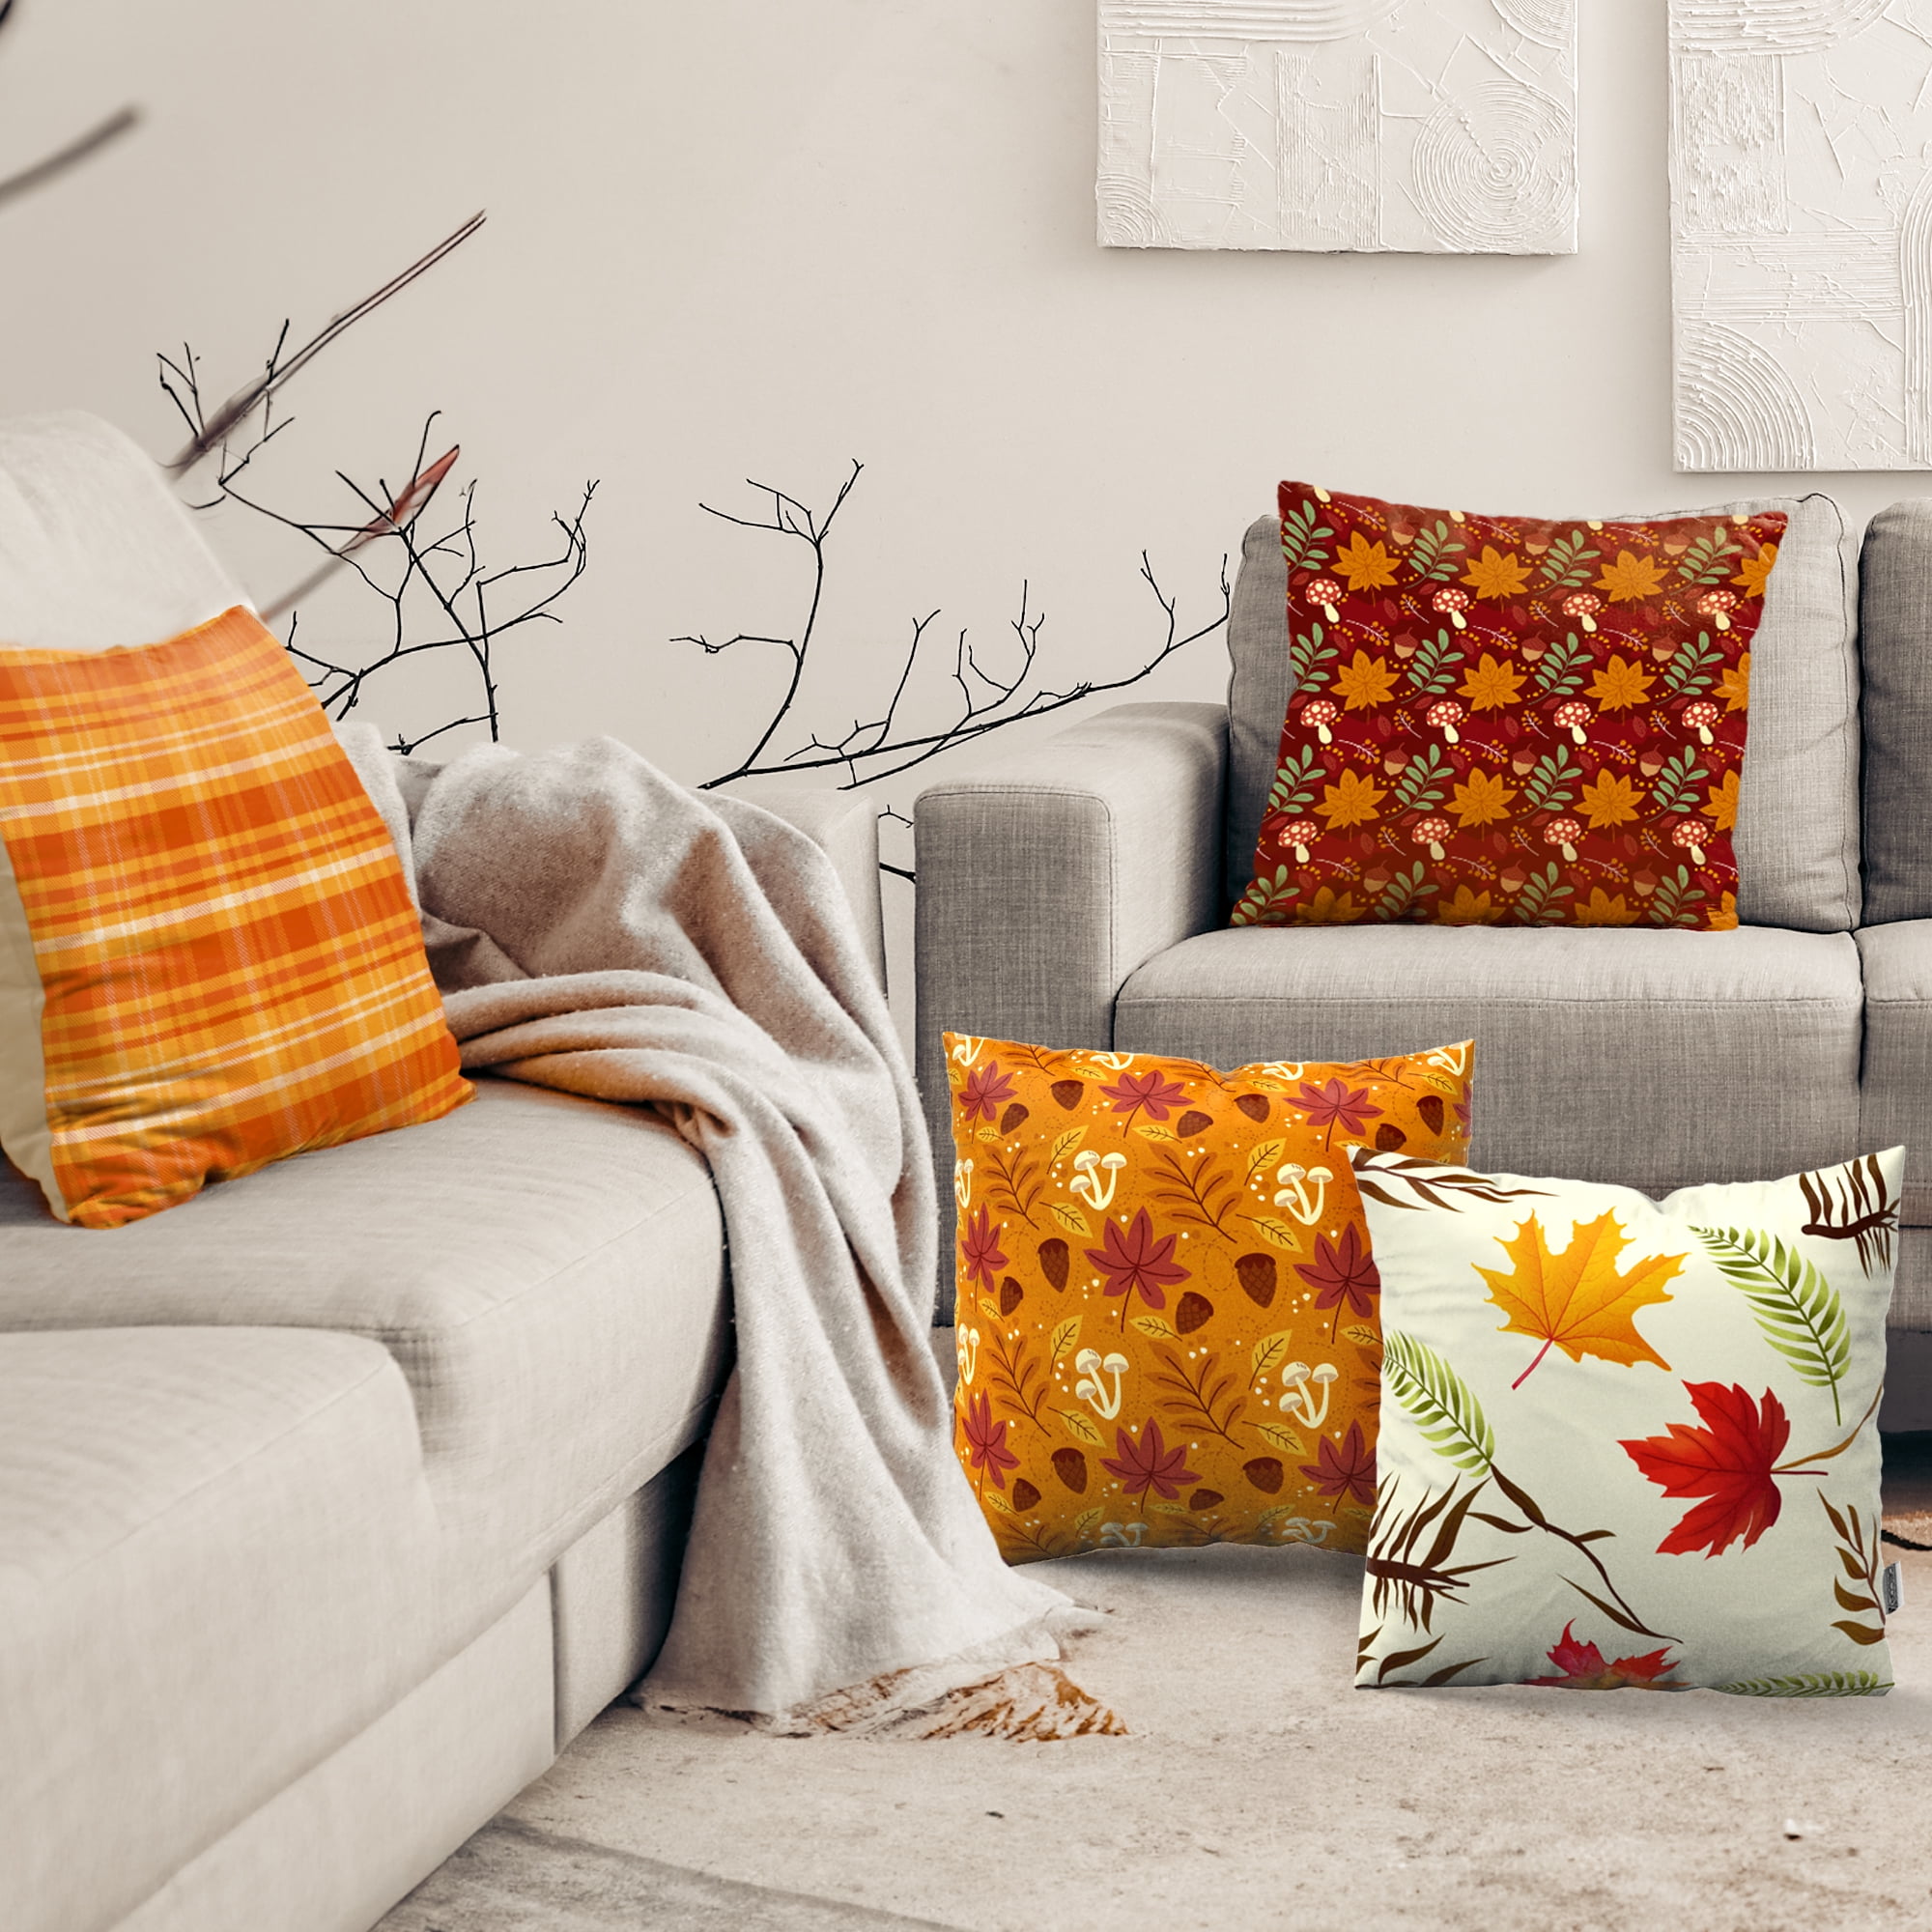  HighonHi Big Pillows for Bed 18 x18 Colorful Autumn